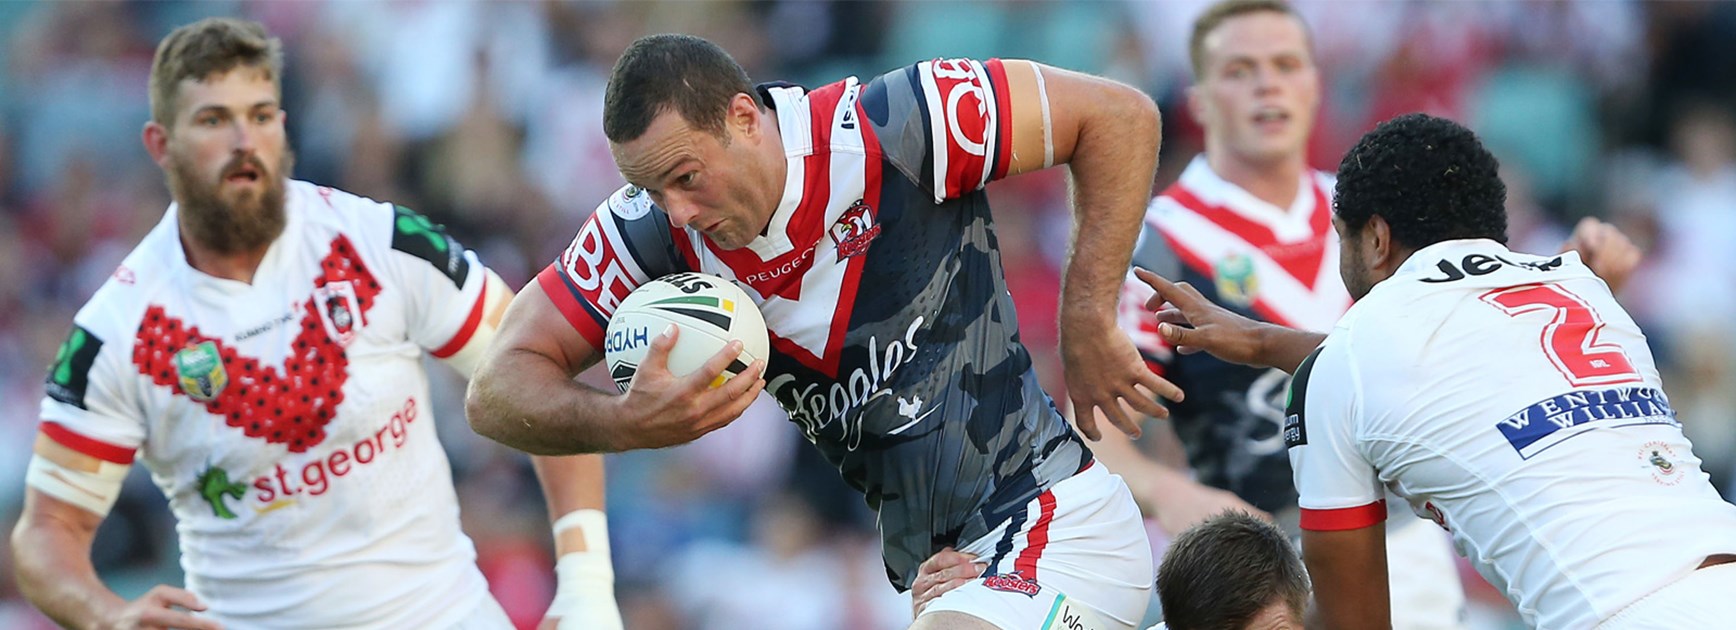 Roosters second-rower Boyd Cordner made his return from injury against the Dragons on Anzac Day.